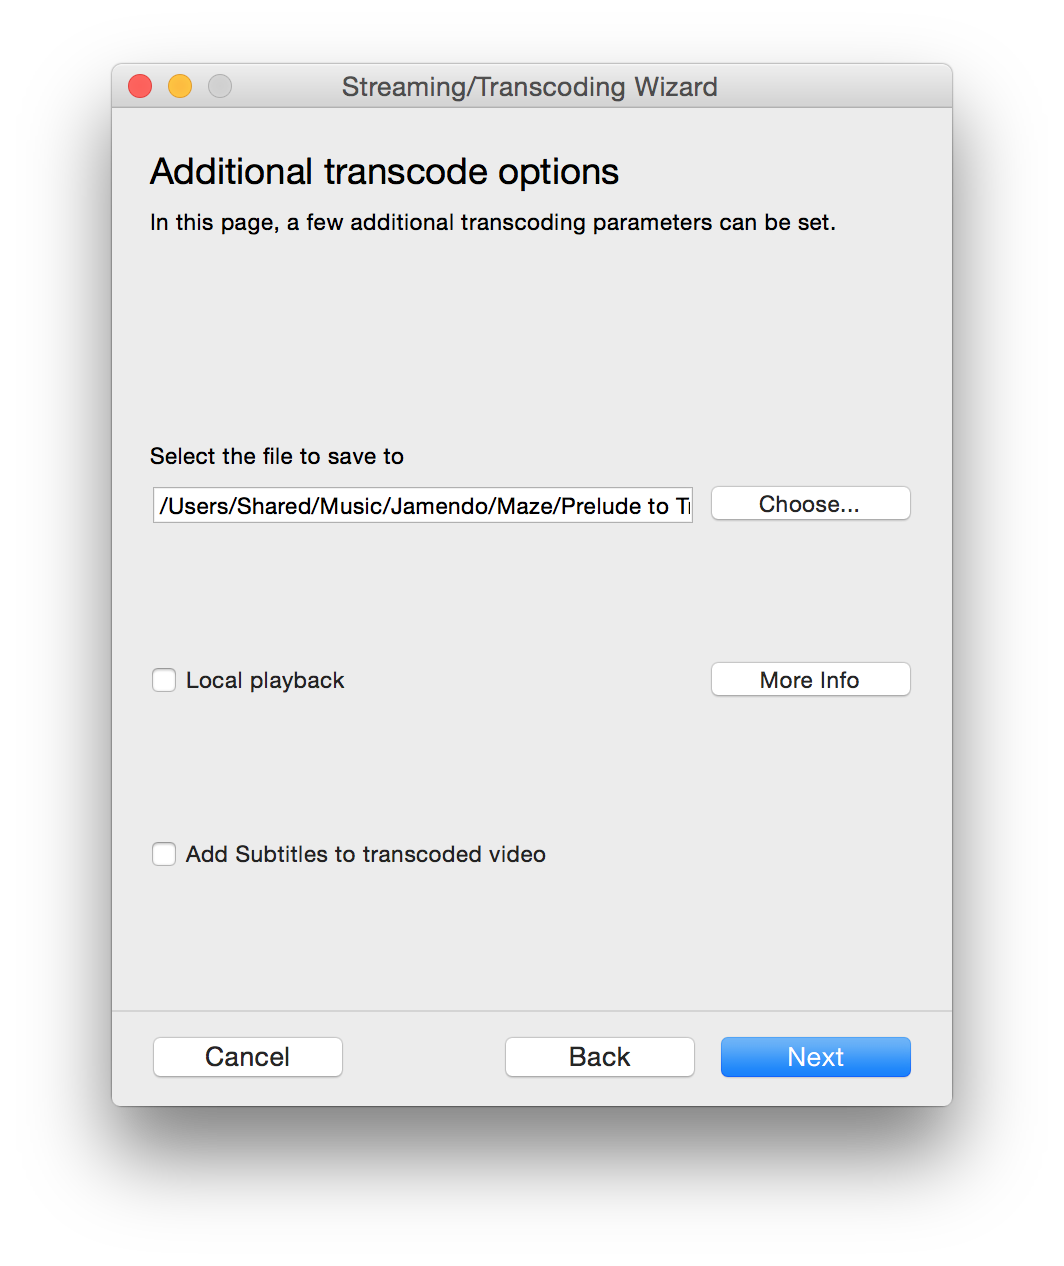 Additional transcode options